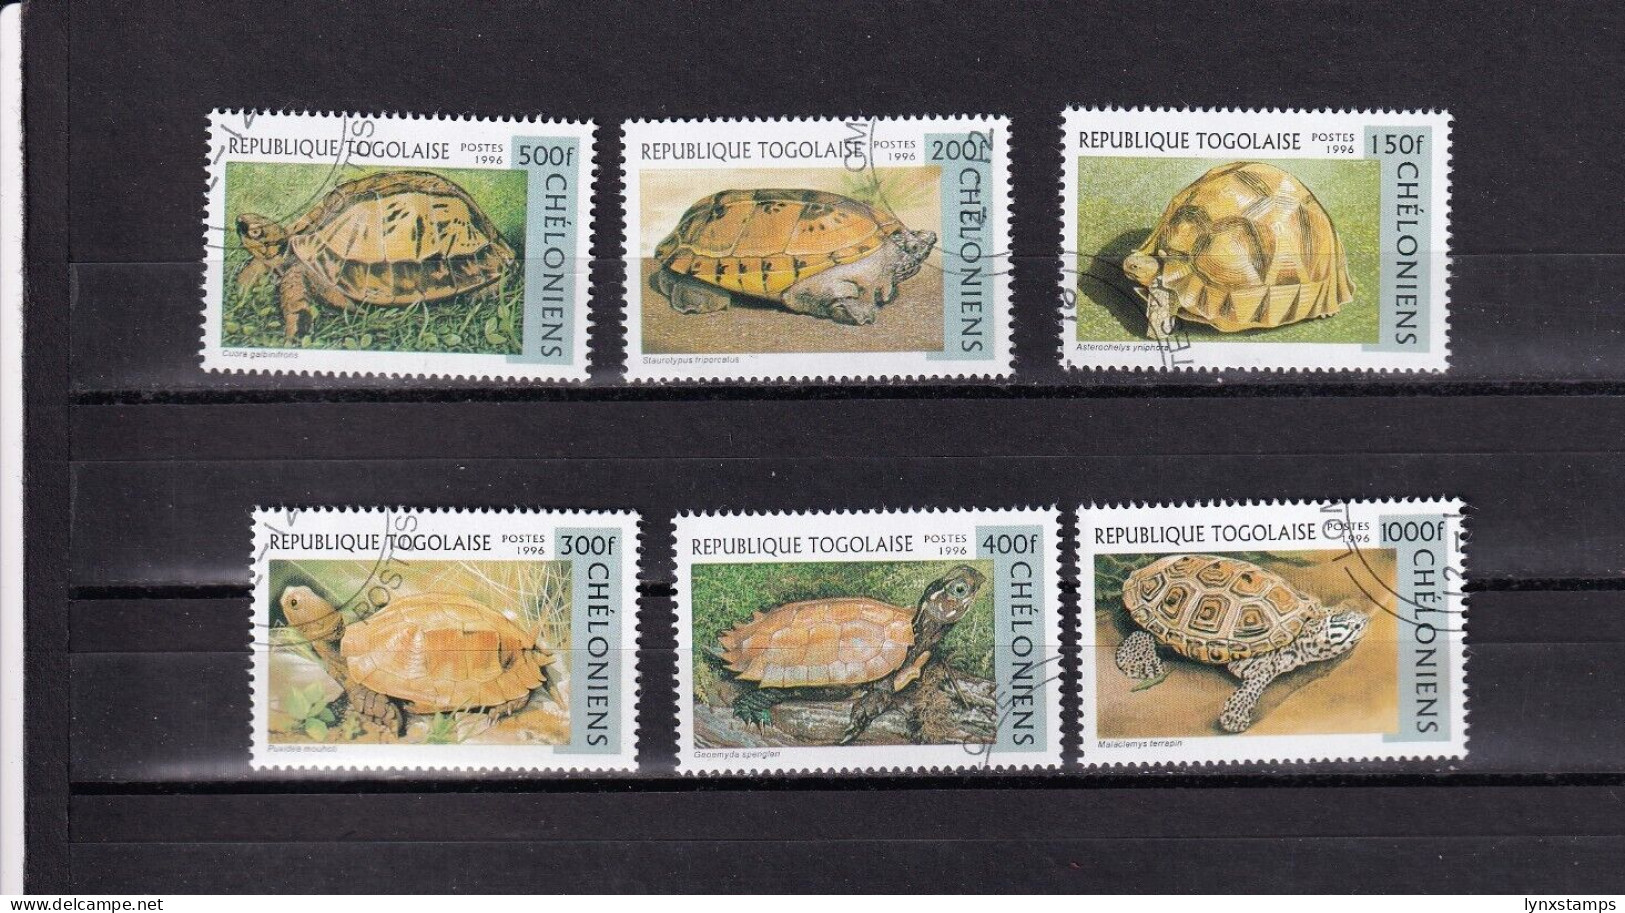 SA03 Togo 1996 Turtles Used Stamps - Tortues